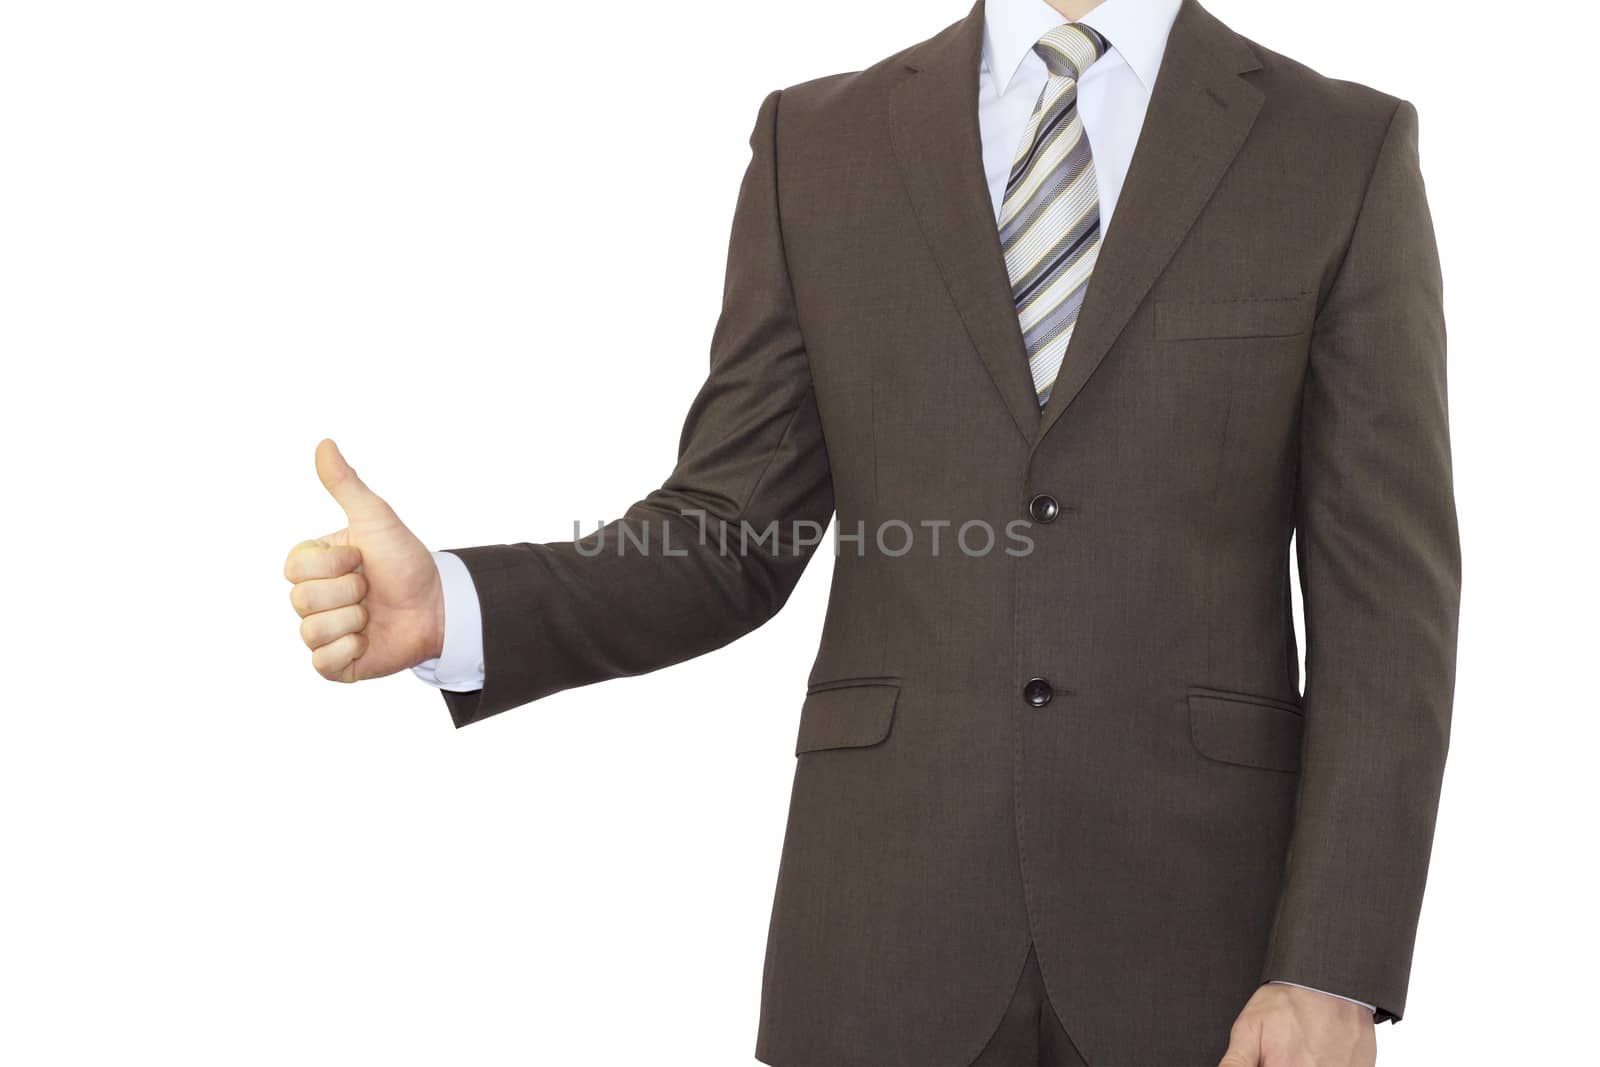 Businessman in a suit holding his thumb up. Isolated on white background